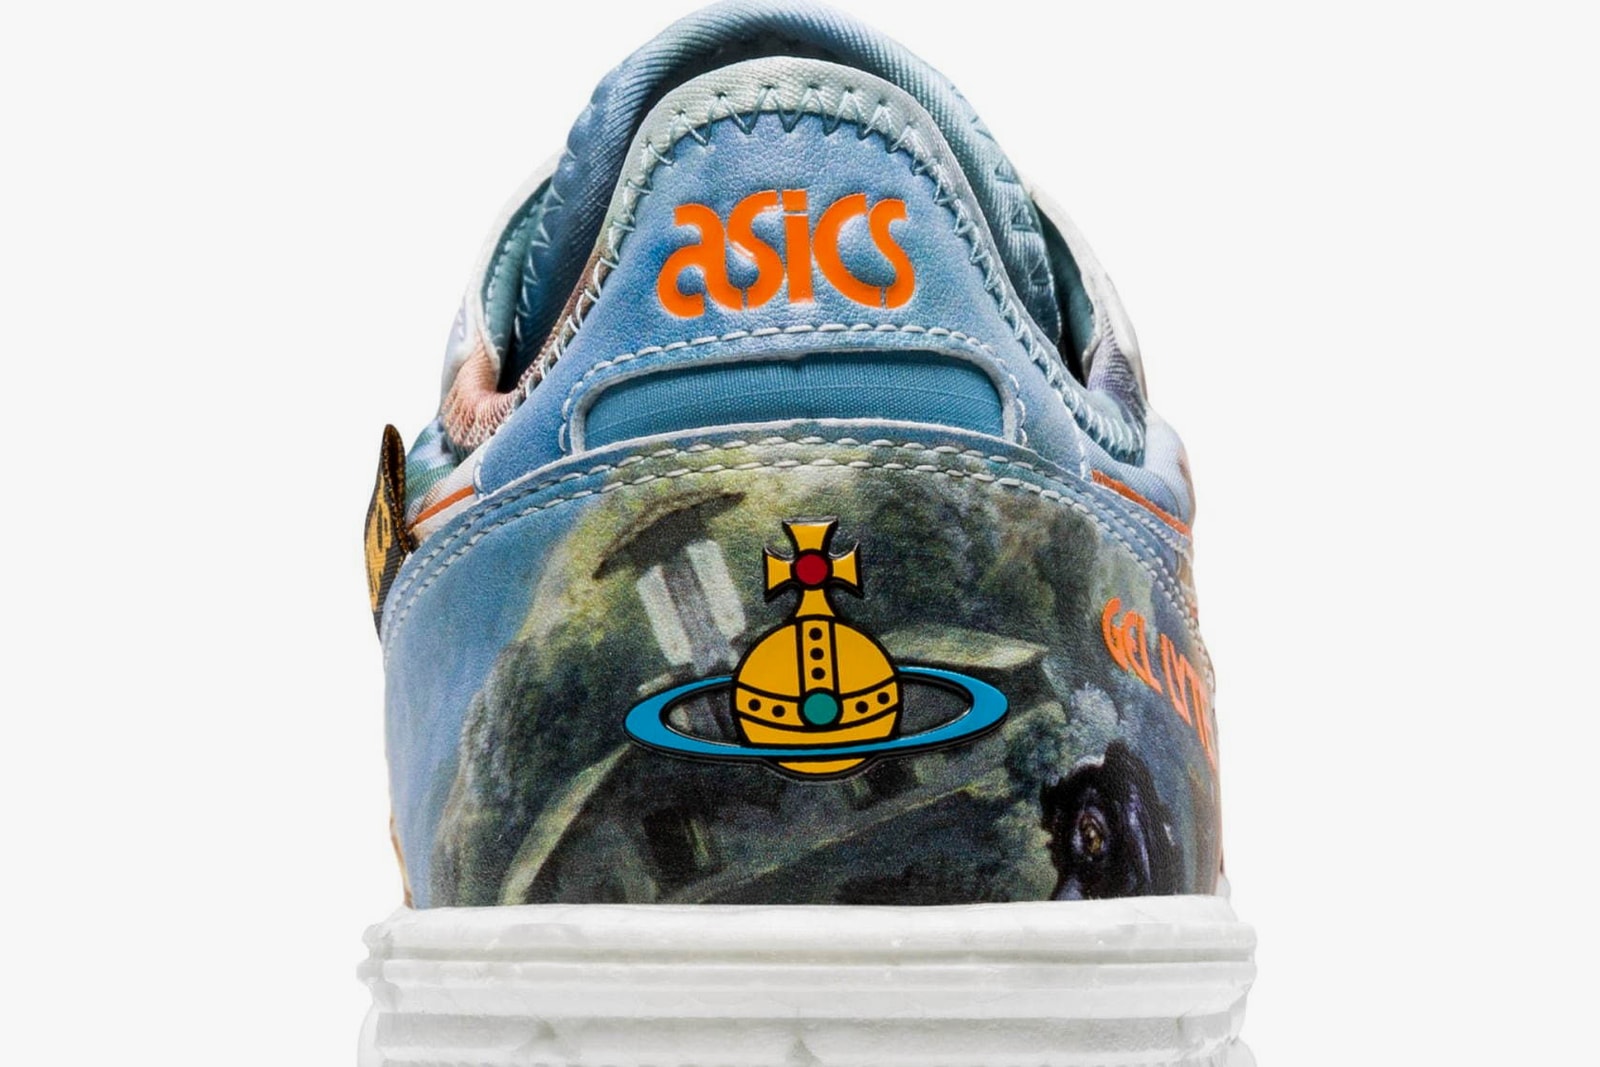 Vivienne Westwood x ASICS Second Sneaker Collab | Hypebeast